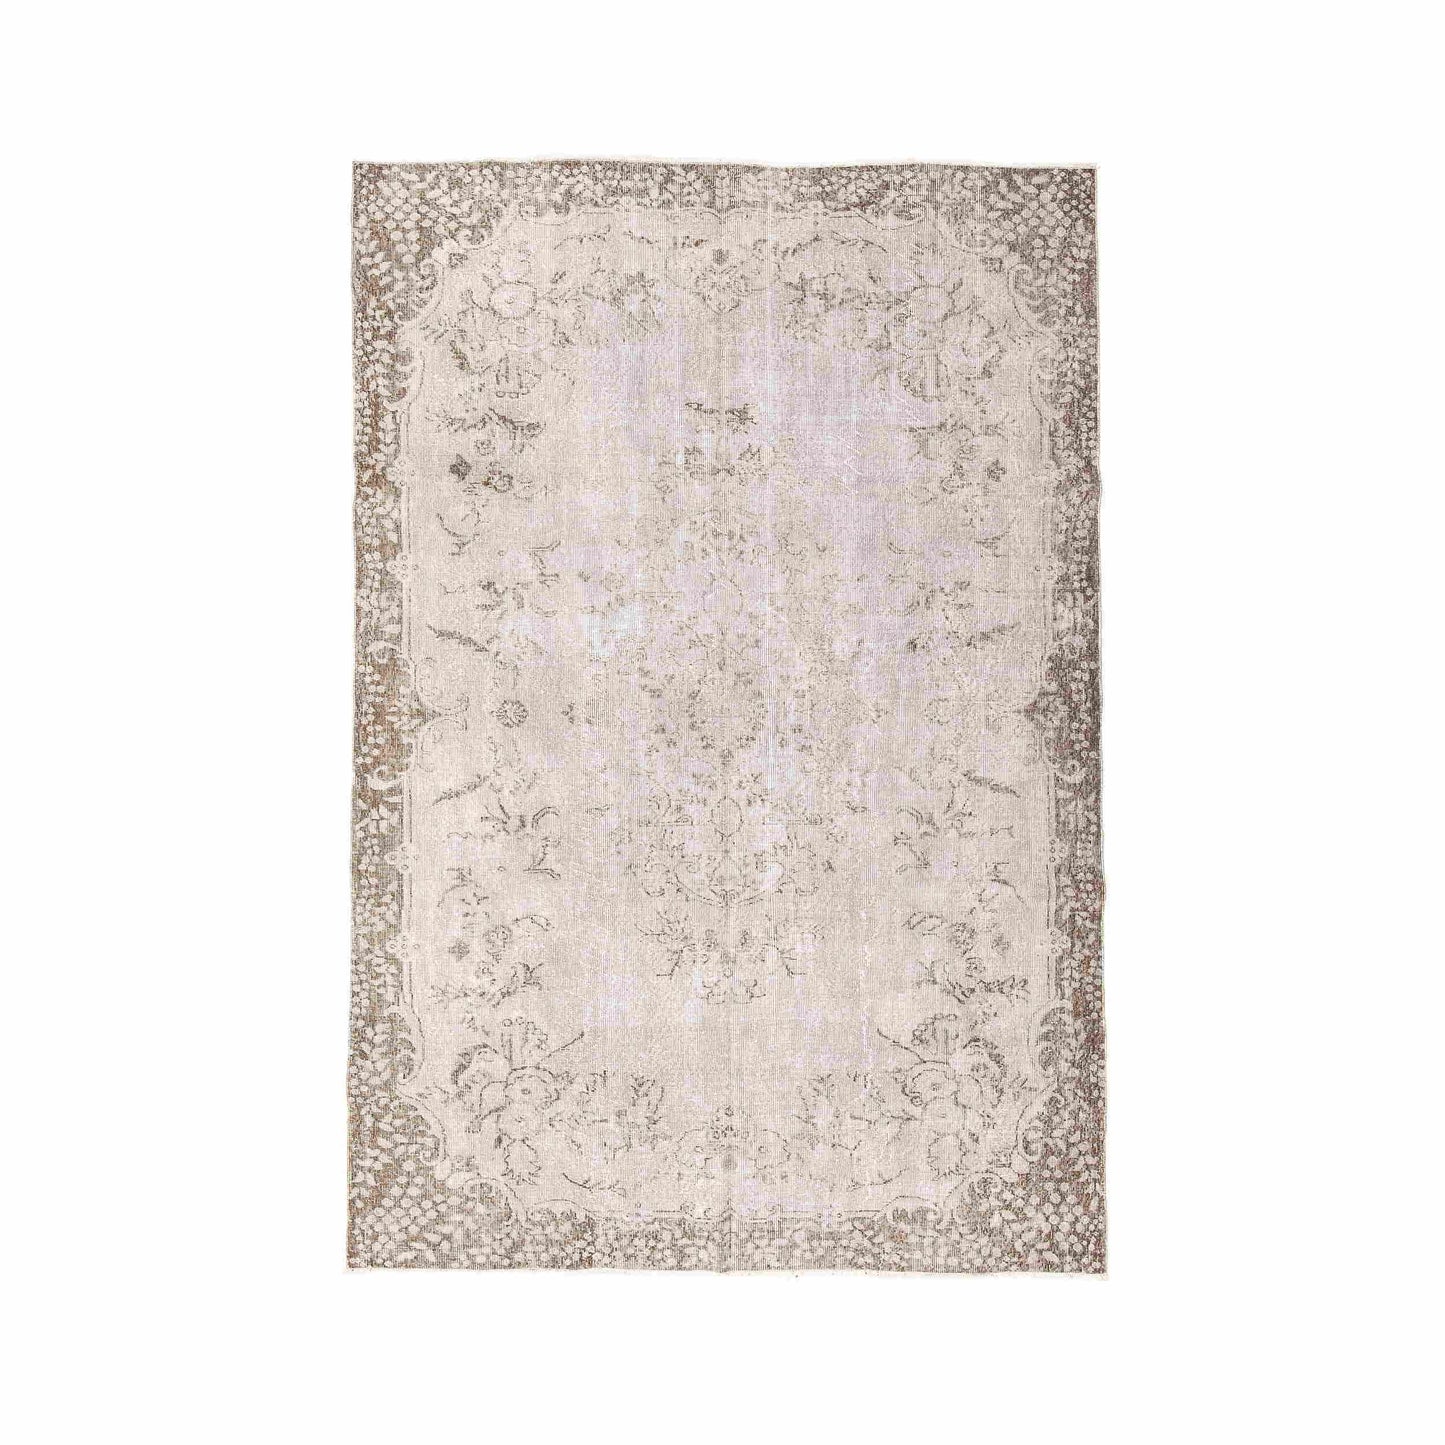 Oriental Rug Vintage Hand Knotted Wool On Cotton 200 x 306 Cm - 6' 7'' x 10' 1'' Stone C009 ER23